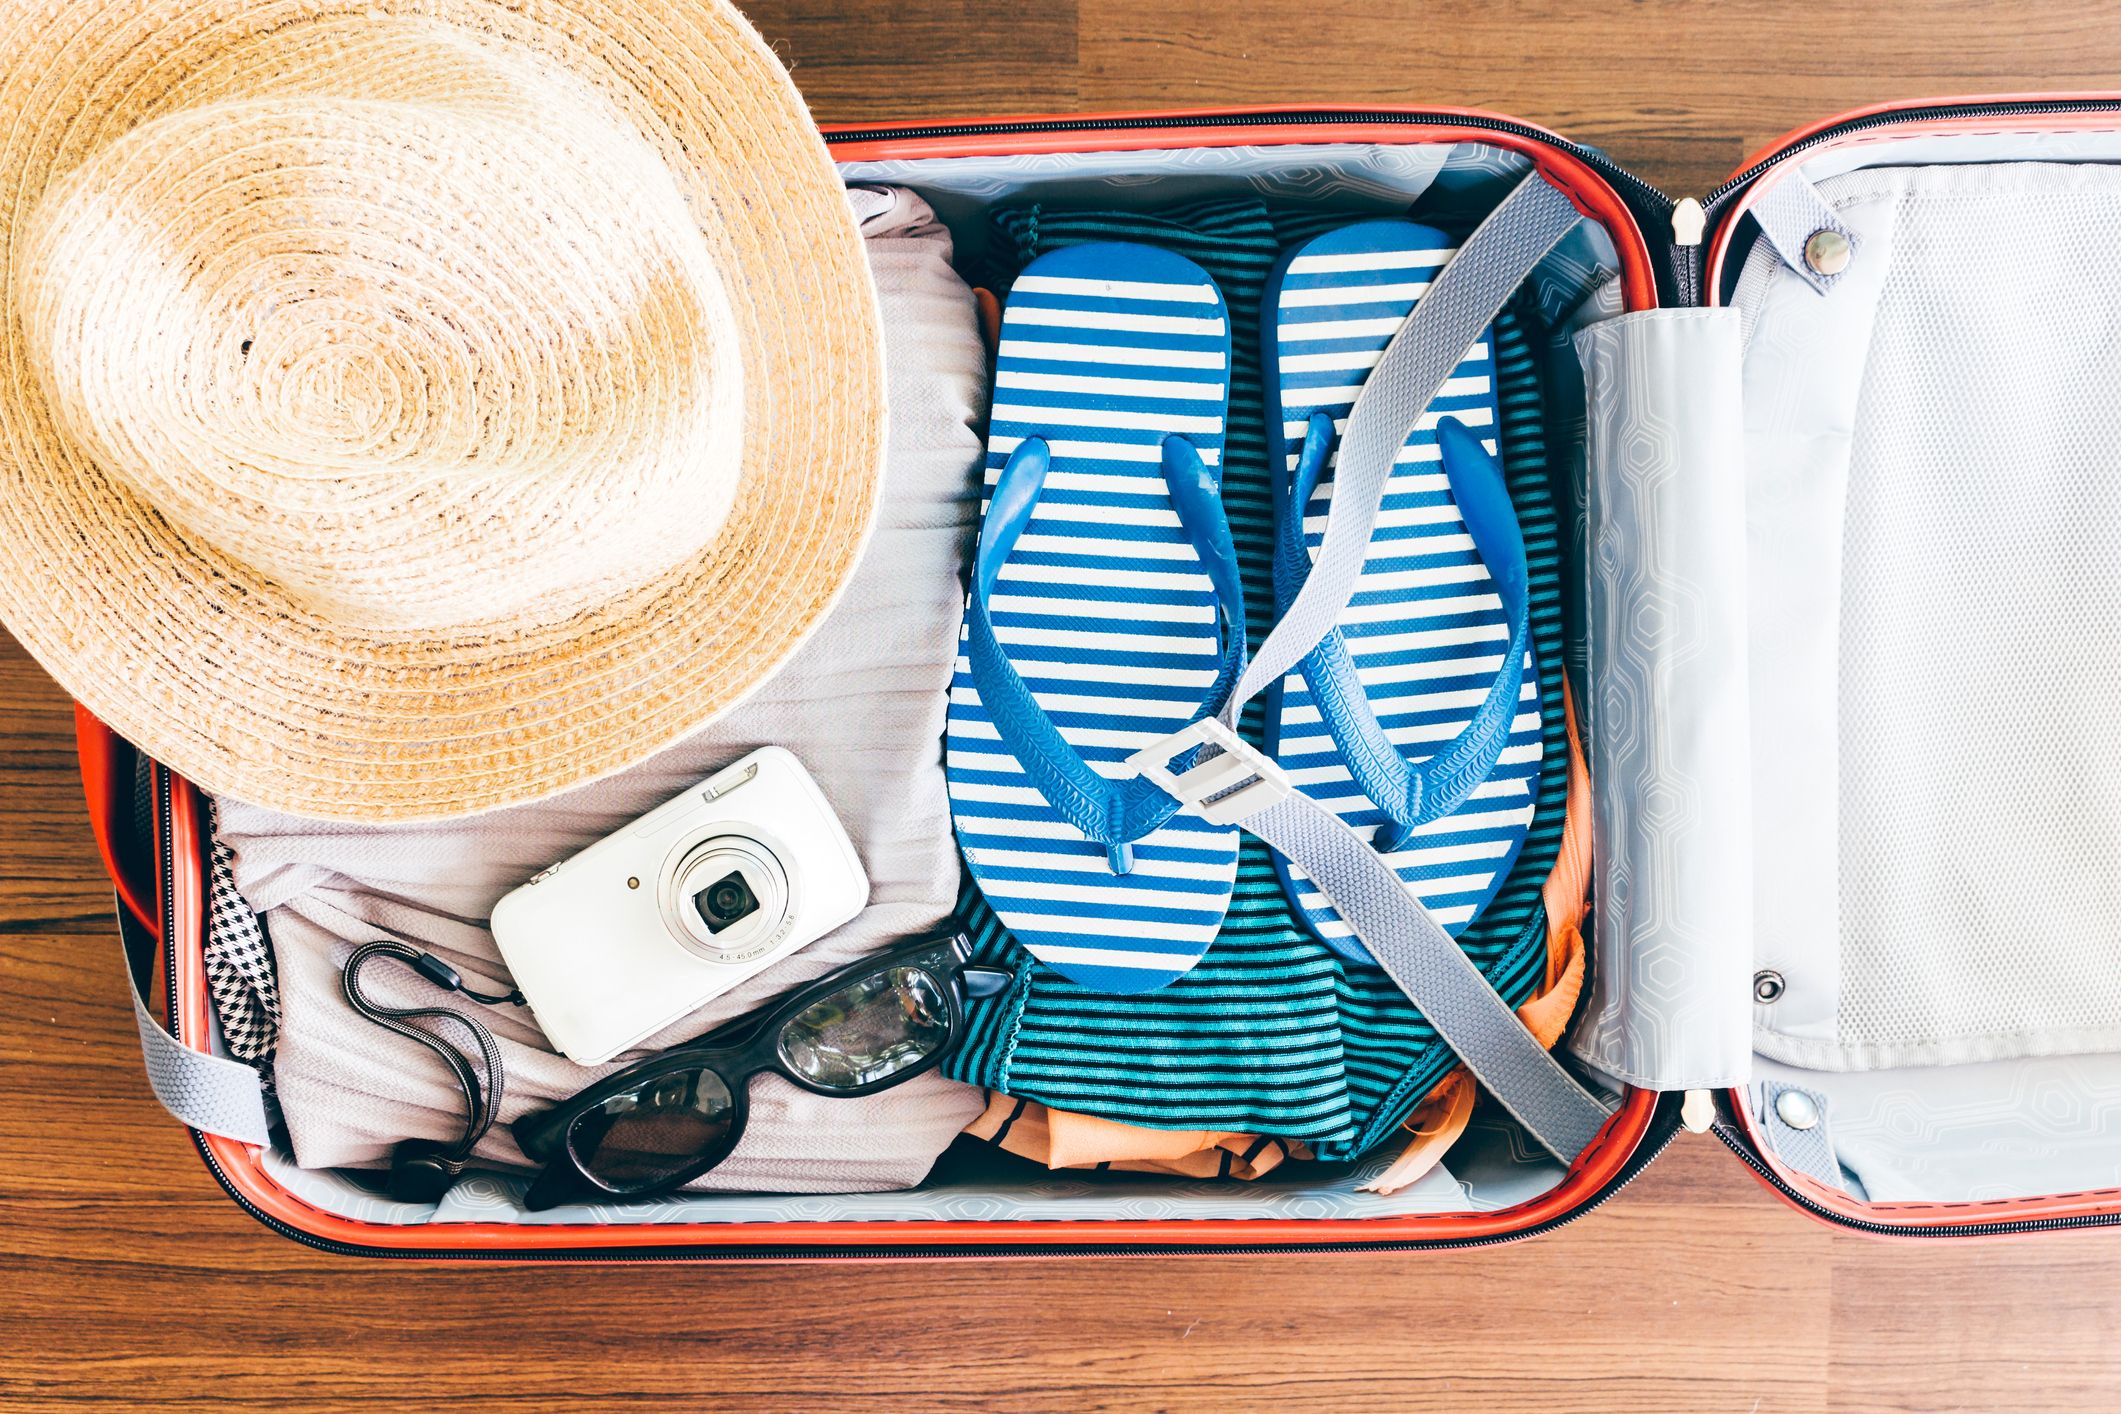 Travel Smart: The Top Accessories to Pack for Your Next Trip